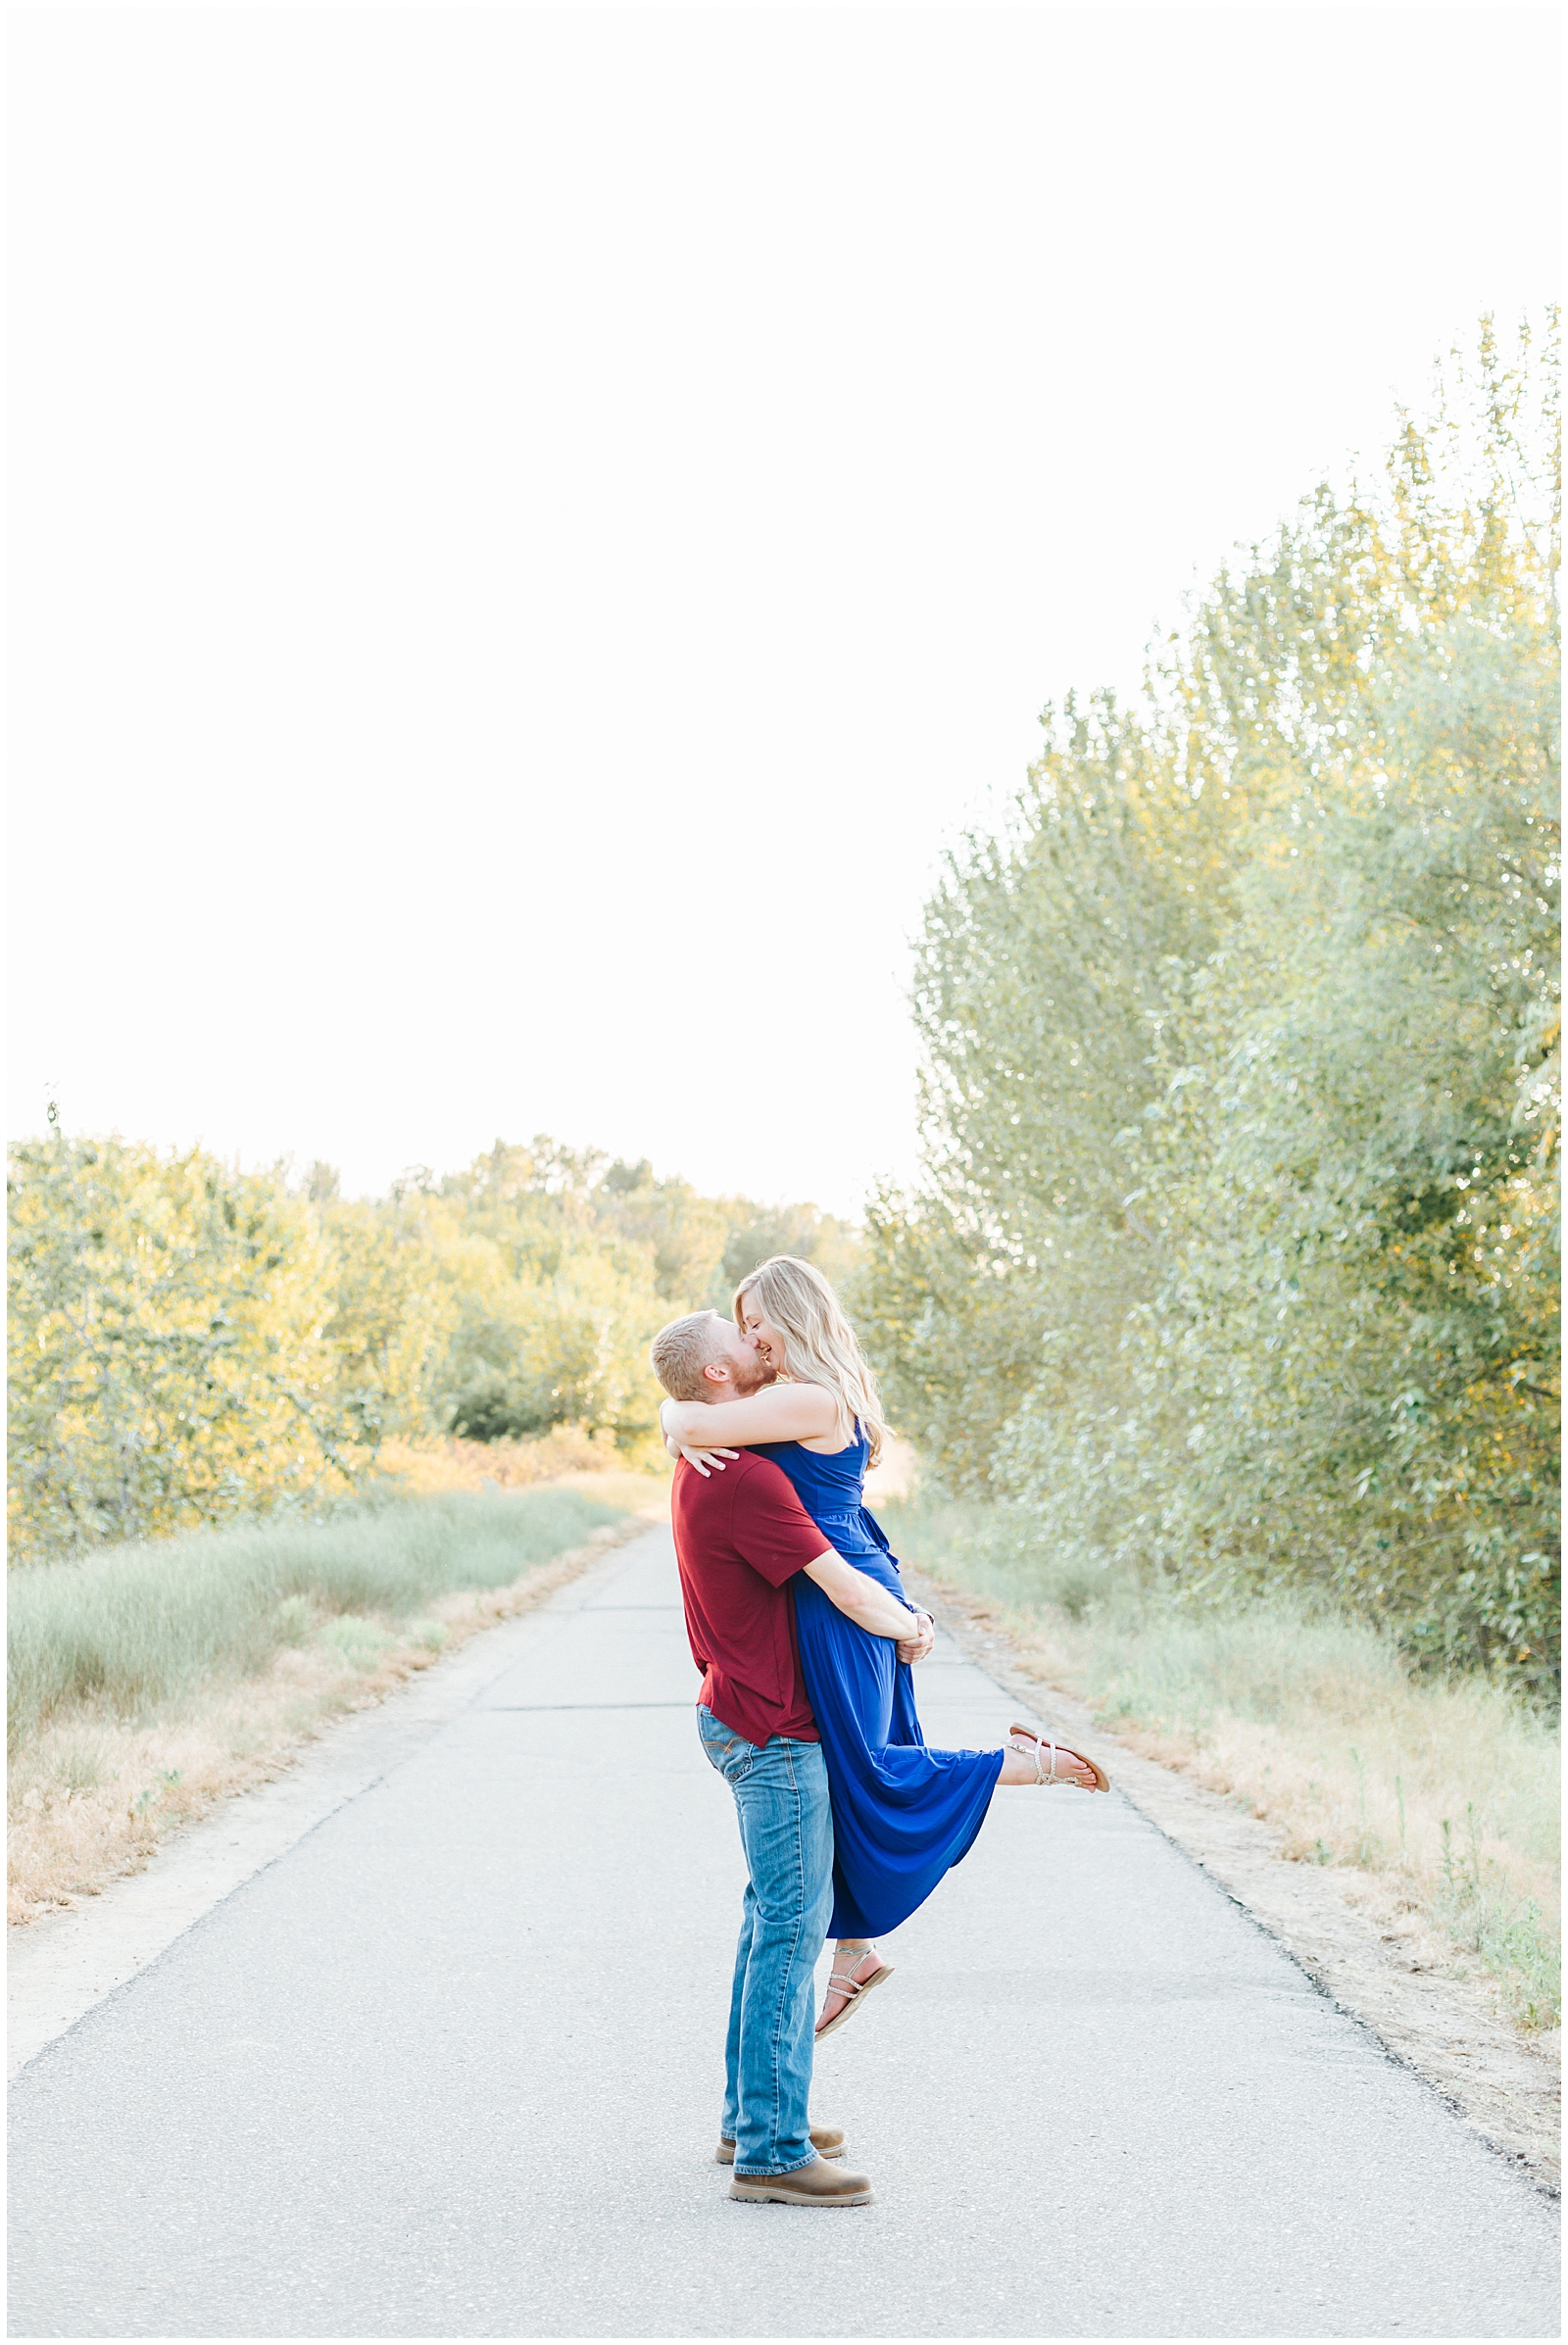 July Boise River Engagement at Merrill Park in Eagle, Idaho